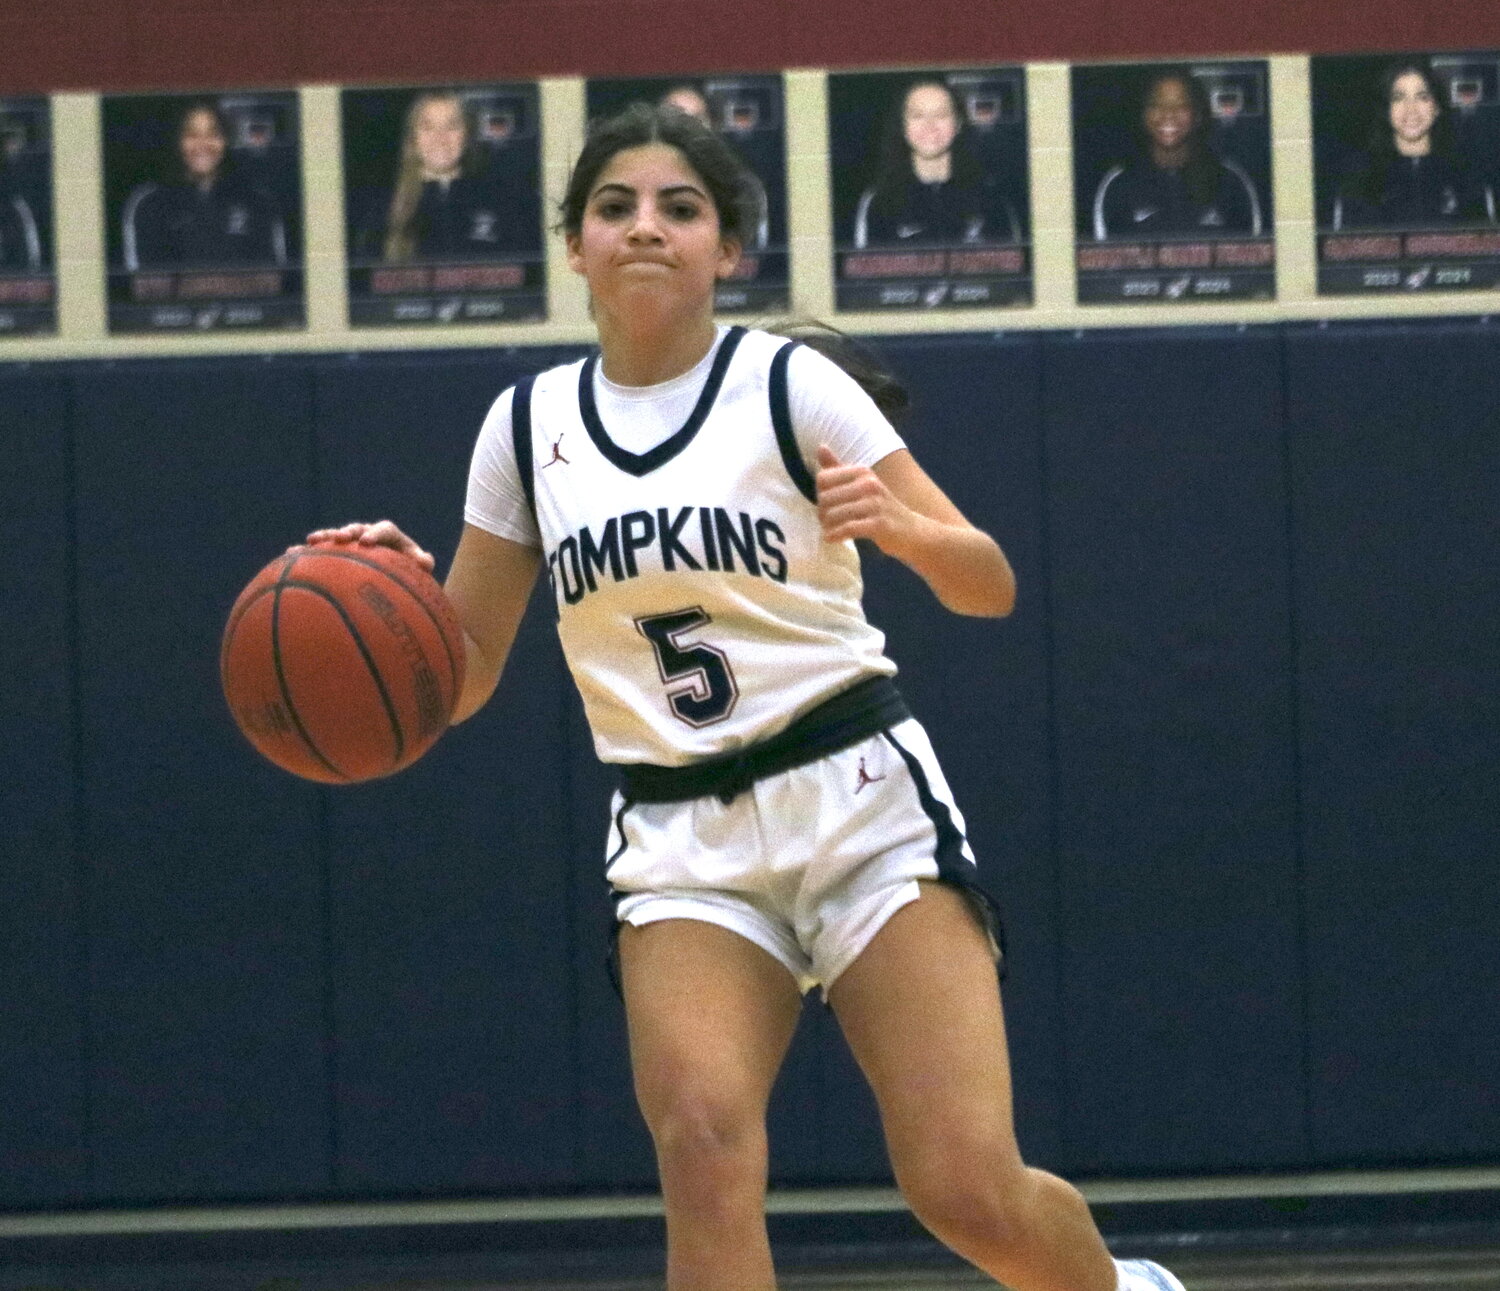 Sascha Coughran dribbles up the court during Tuesday's game between Tompkins and Cinco Ranch at the Tompkins gym.